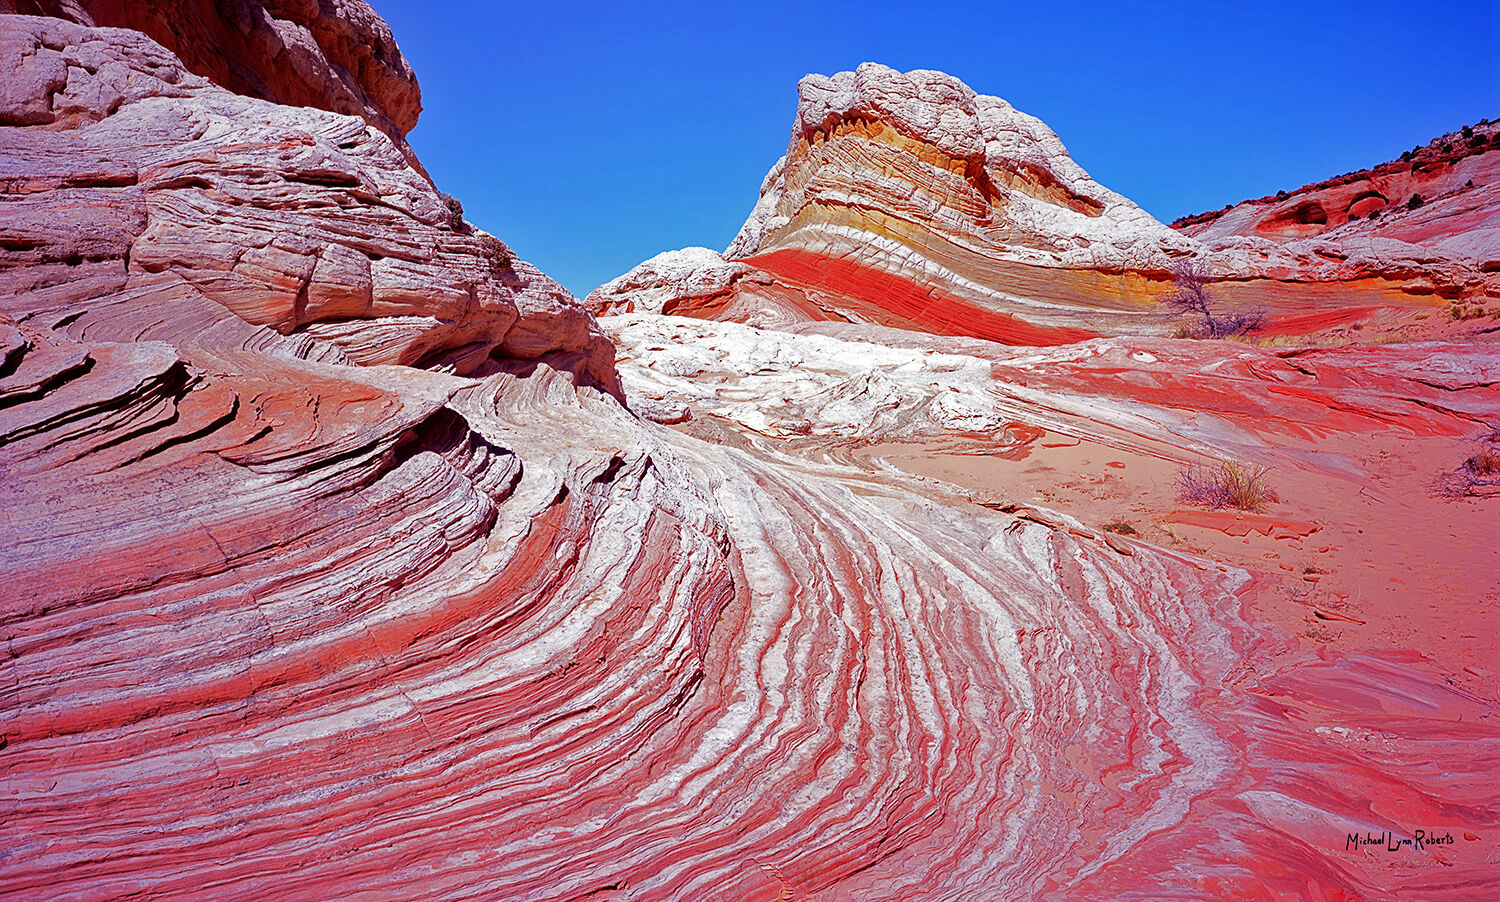 The White Pocket, on the Utah/Arizona border in the Vermillion Cliffs Wilderness Area, is a fantastically colorful and surreal...